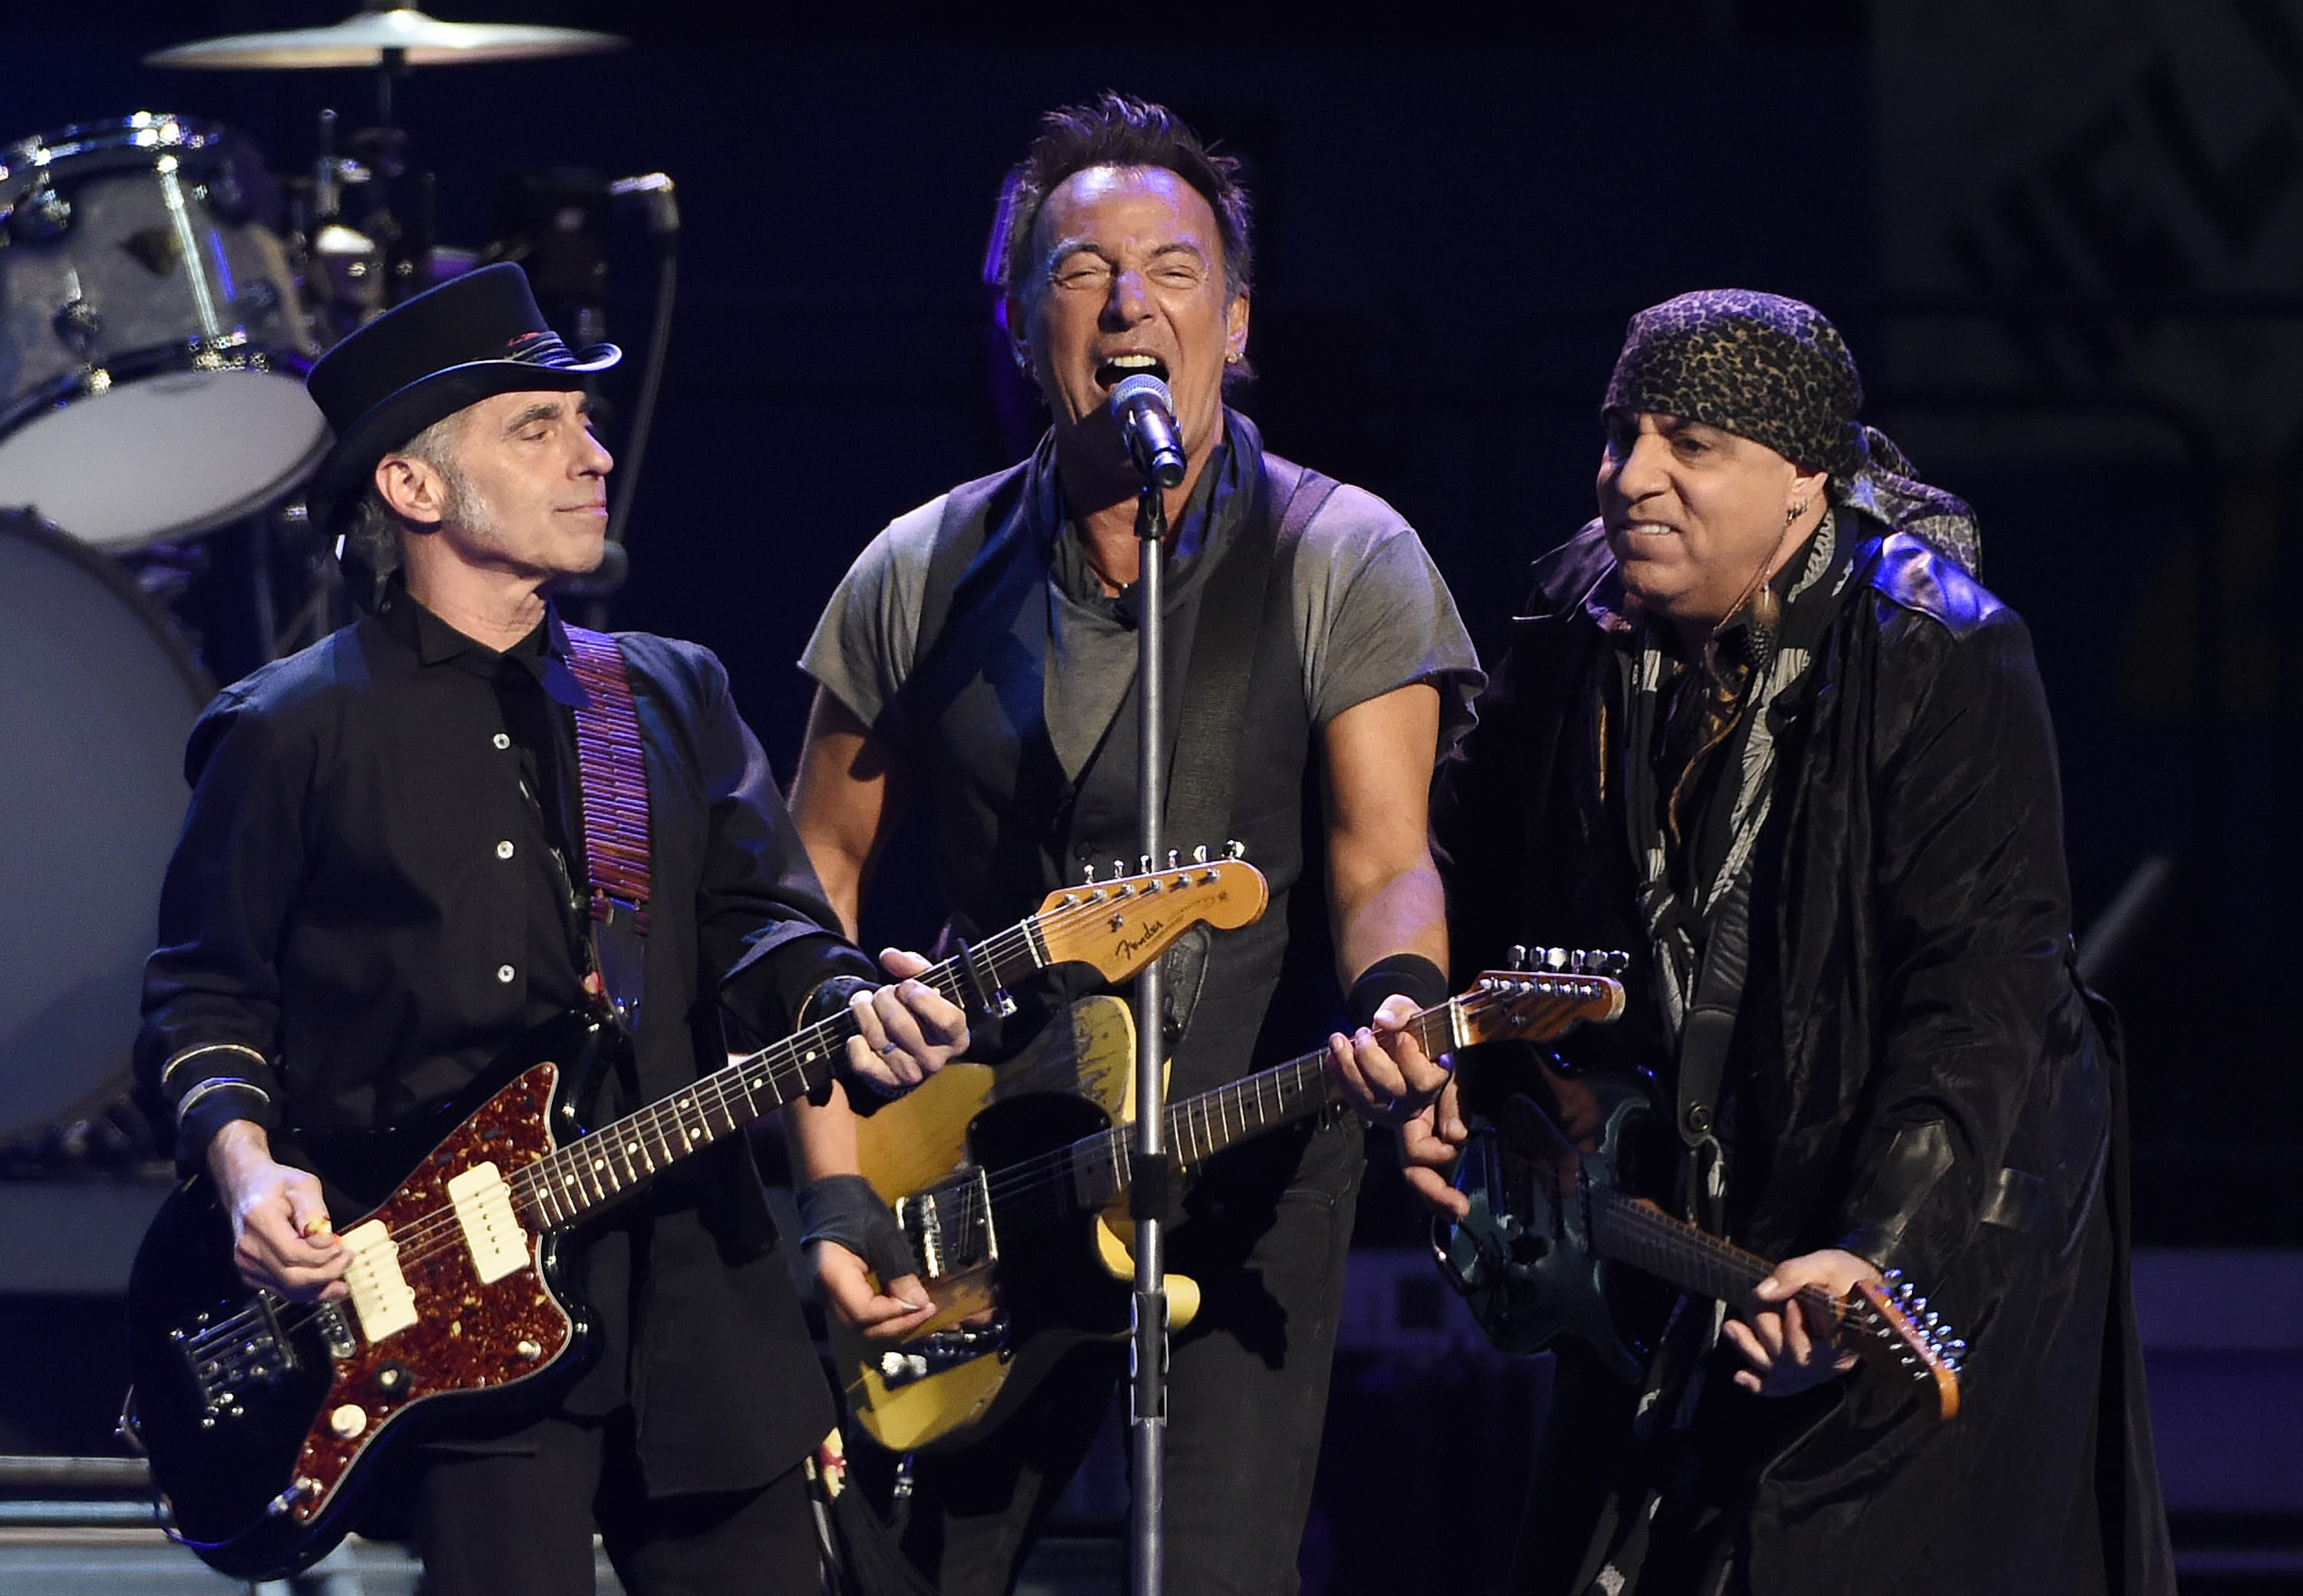 Bruce Springsteen guitarist Nils Lofgren joins protest of Spotify over Covid misinformation